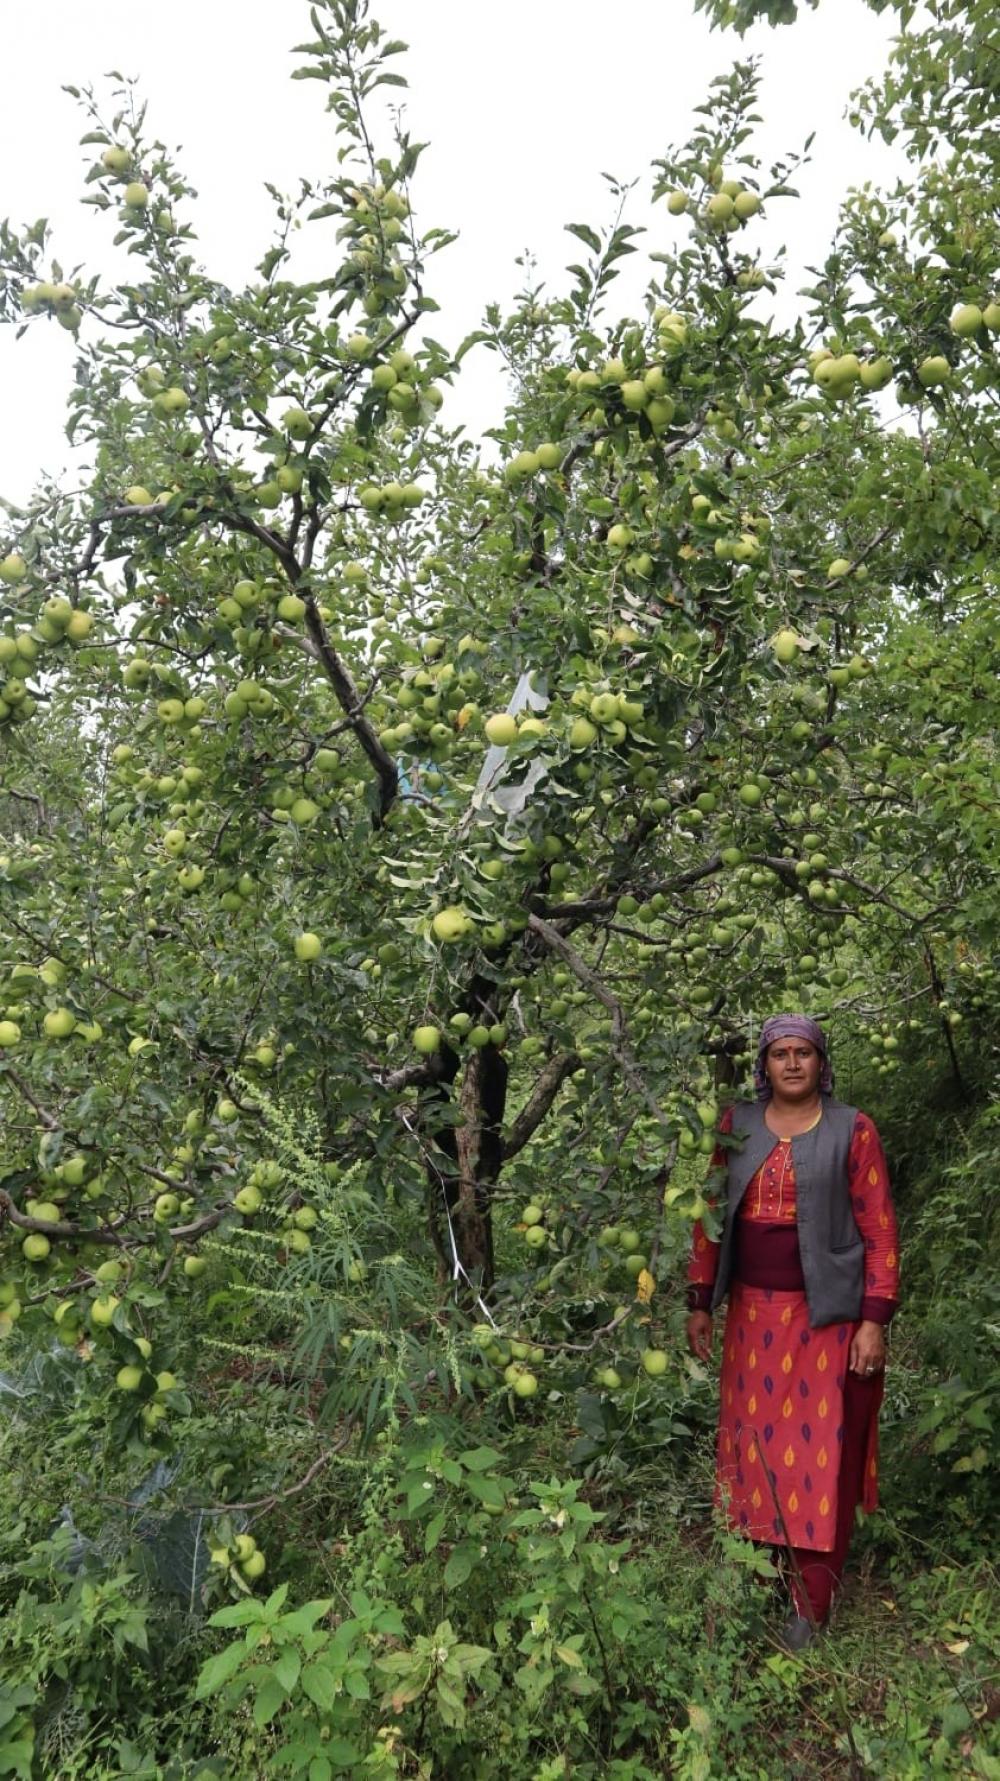 The Weekend Leader - Natural farming gives Himachal apple growers edge